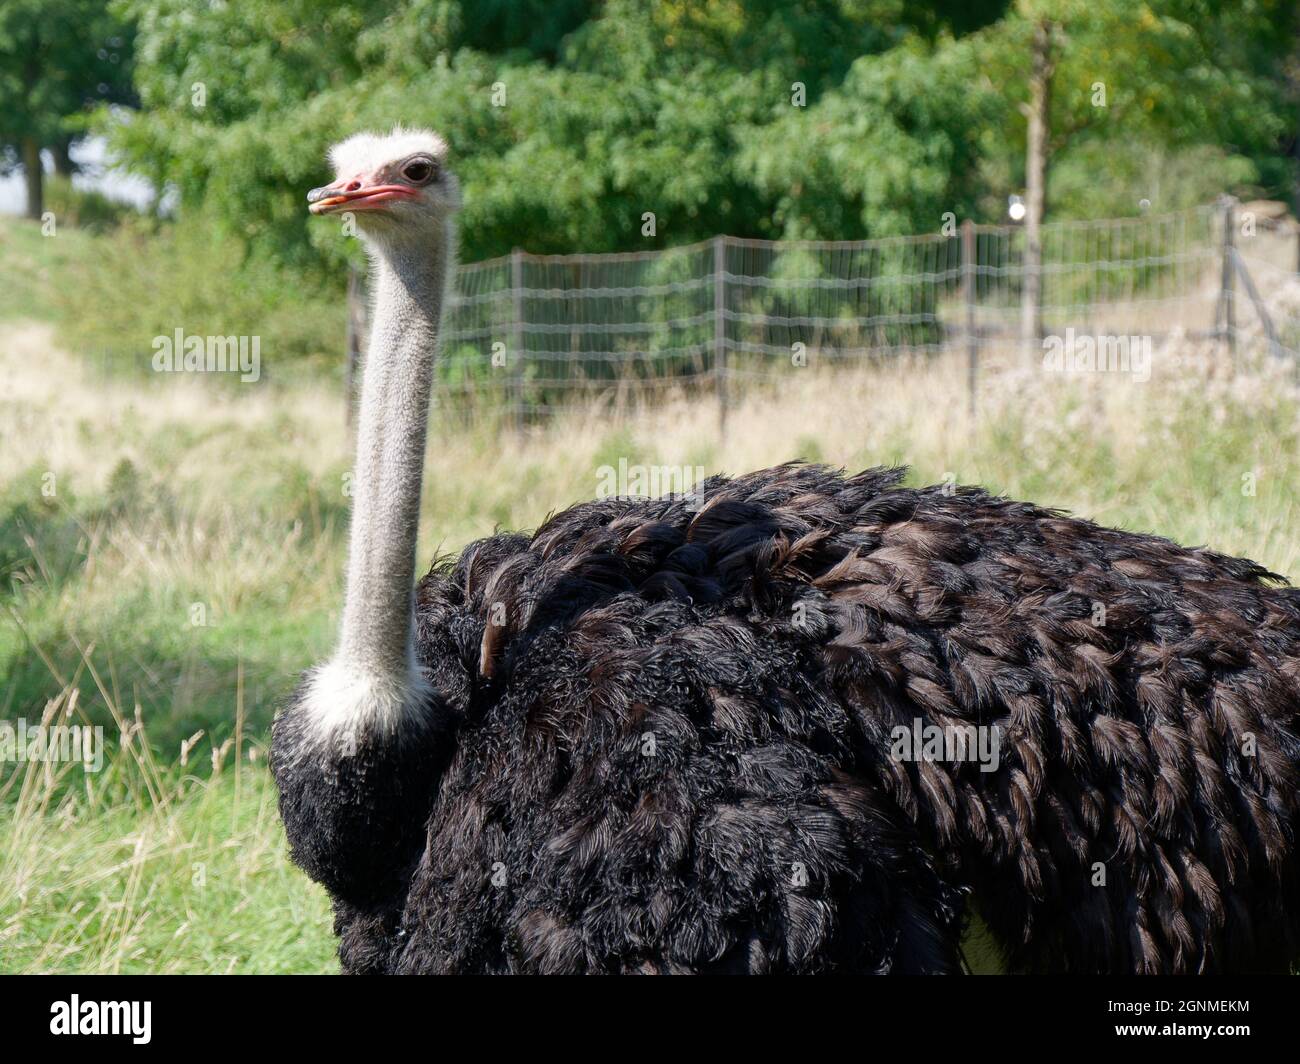 Close up of an Ostrich showing head and part of its body Stock Photo